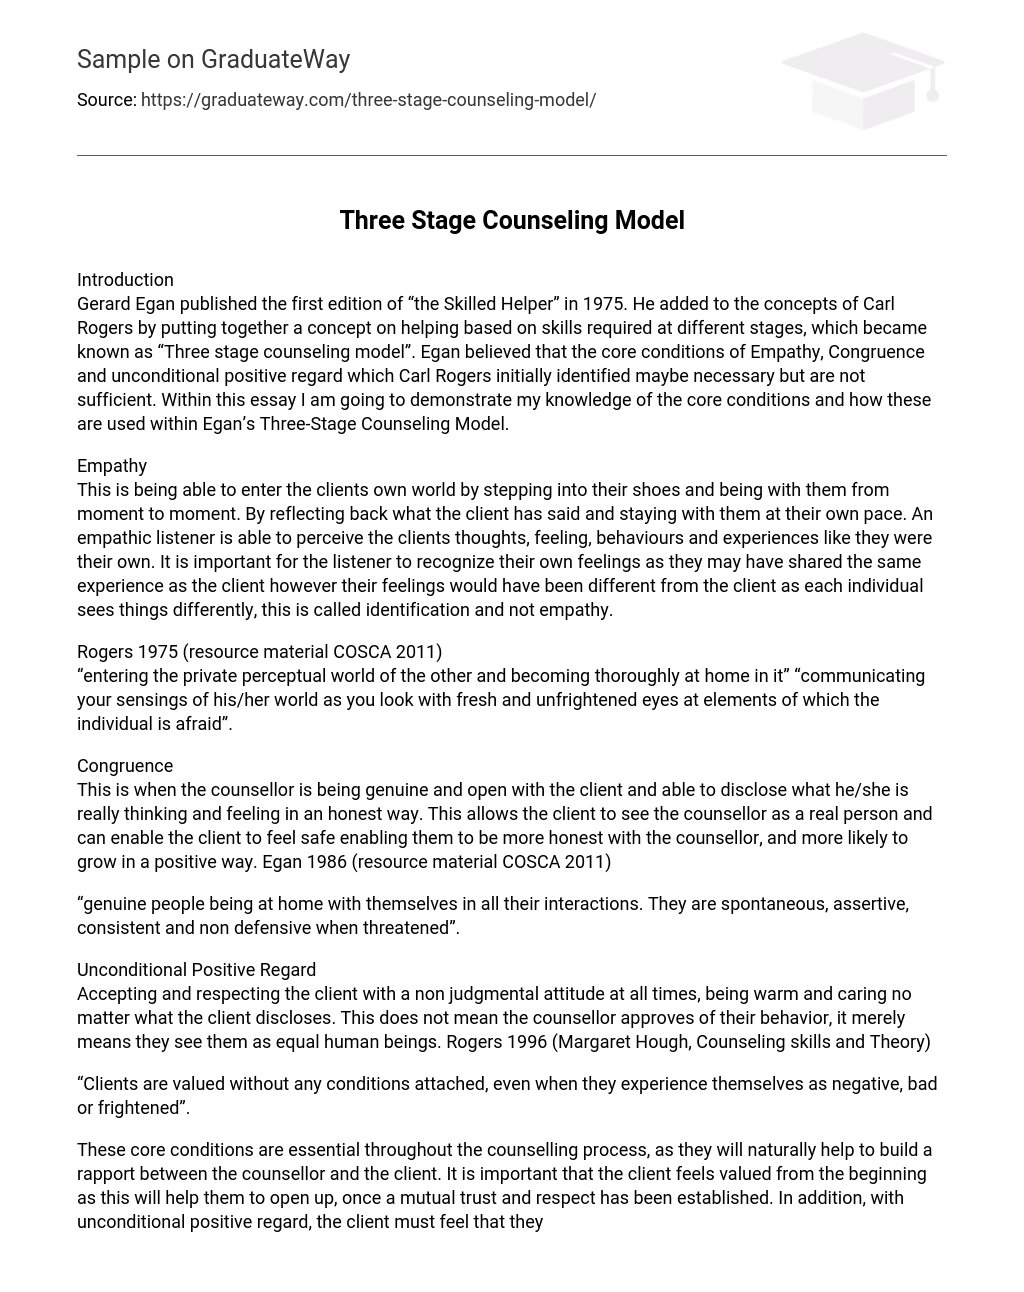 Three Stage Counseling Model